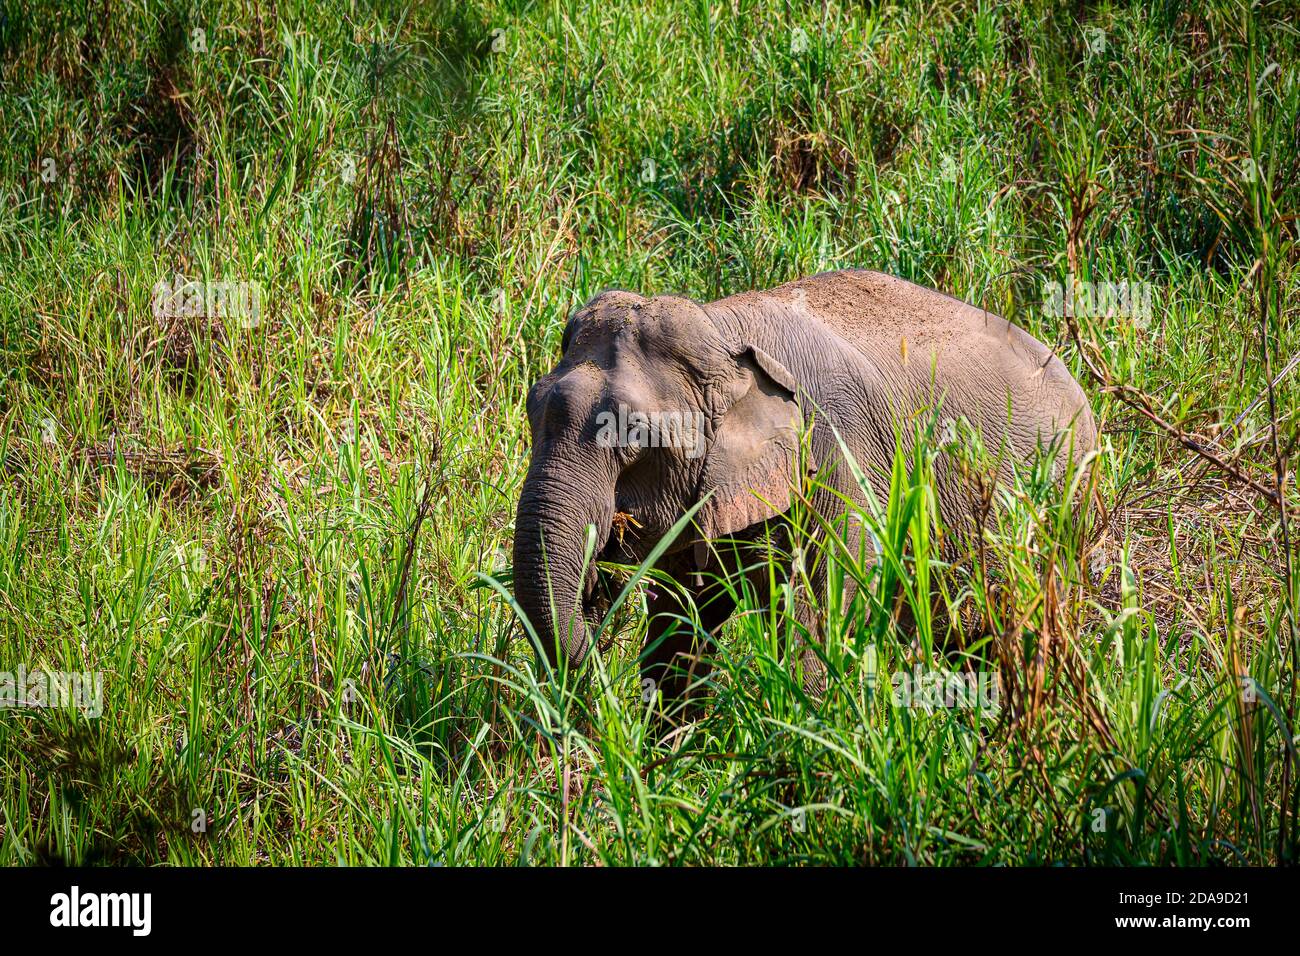 Asian Elephant (Elephas maximus) It is a Big mammal with green grass in the trunk. Stock Photo